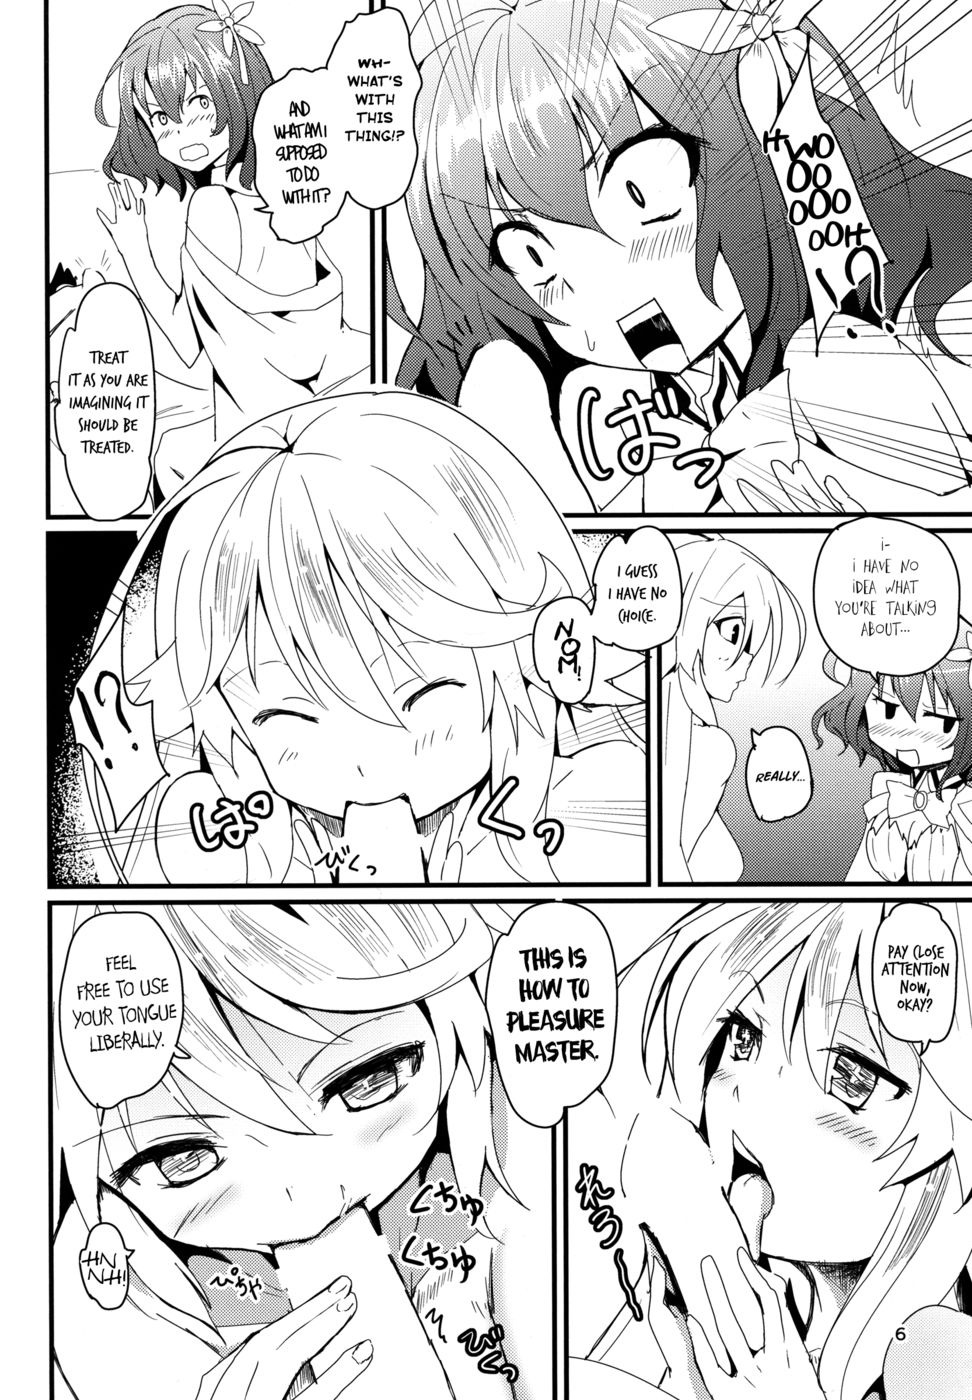 Hentai Manga Comic-Jibril and Steph's Attempt at Service!-Read-6